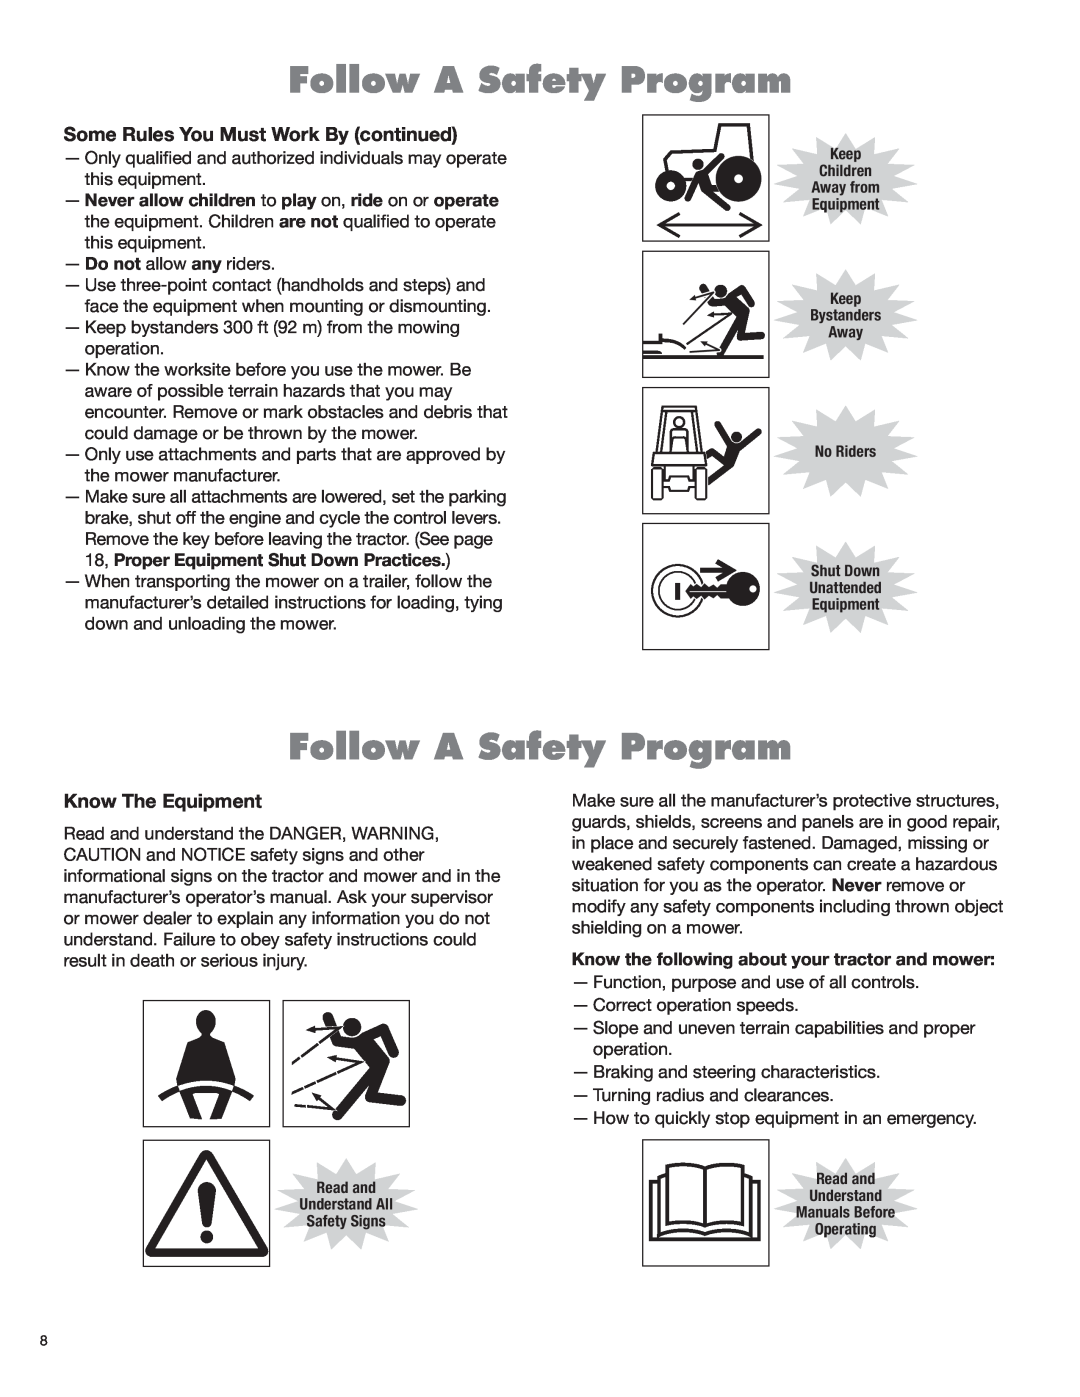 Rhino Mounts DB150 manual Follow A Safety Program, Some Rules You Must Work By continued, Know The Equipment 